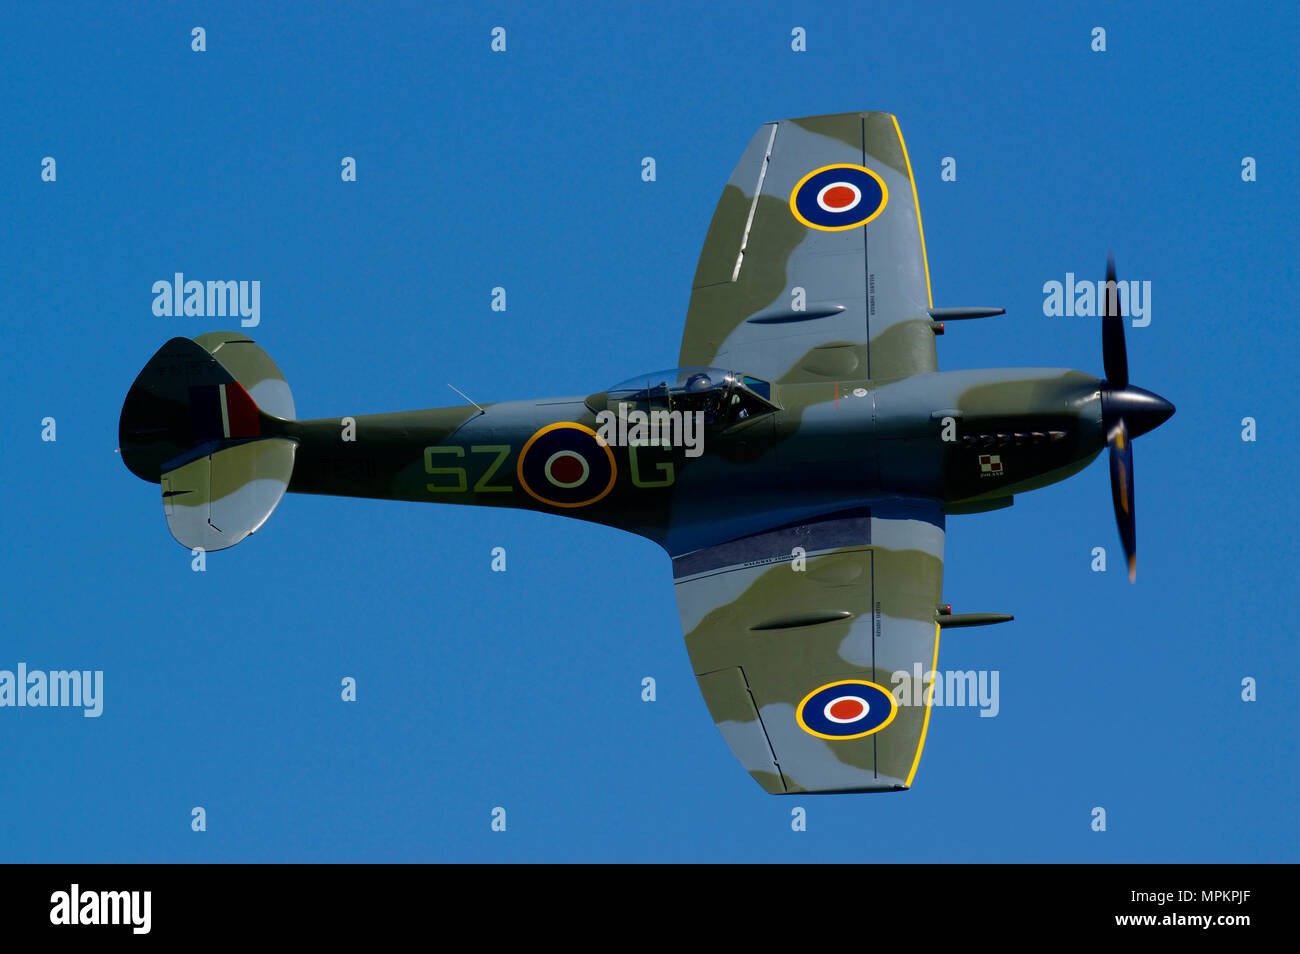 Vickers Supermarine Spitfire Mk XV!, TE311 à Old Warden, Banque D'Images